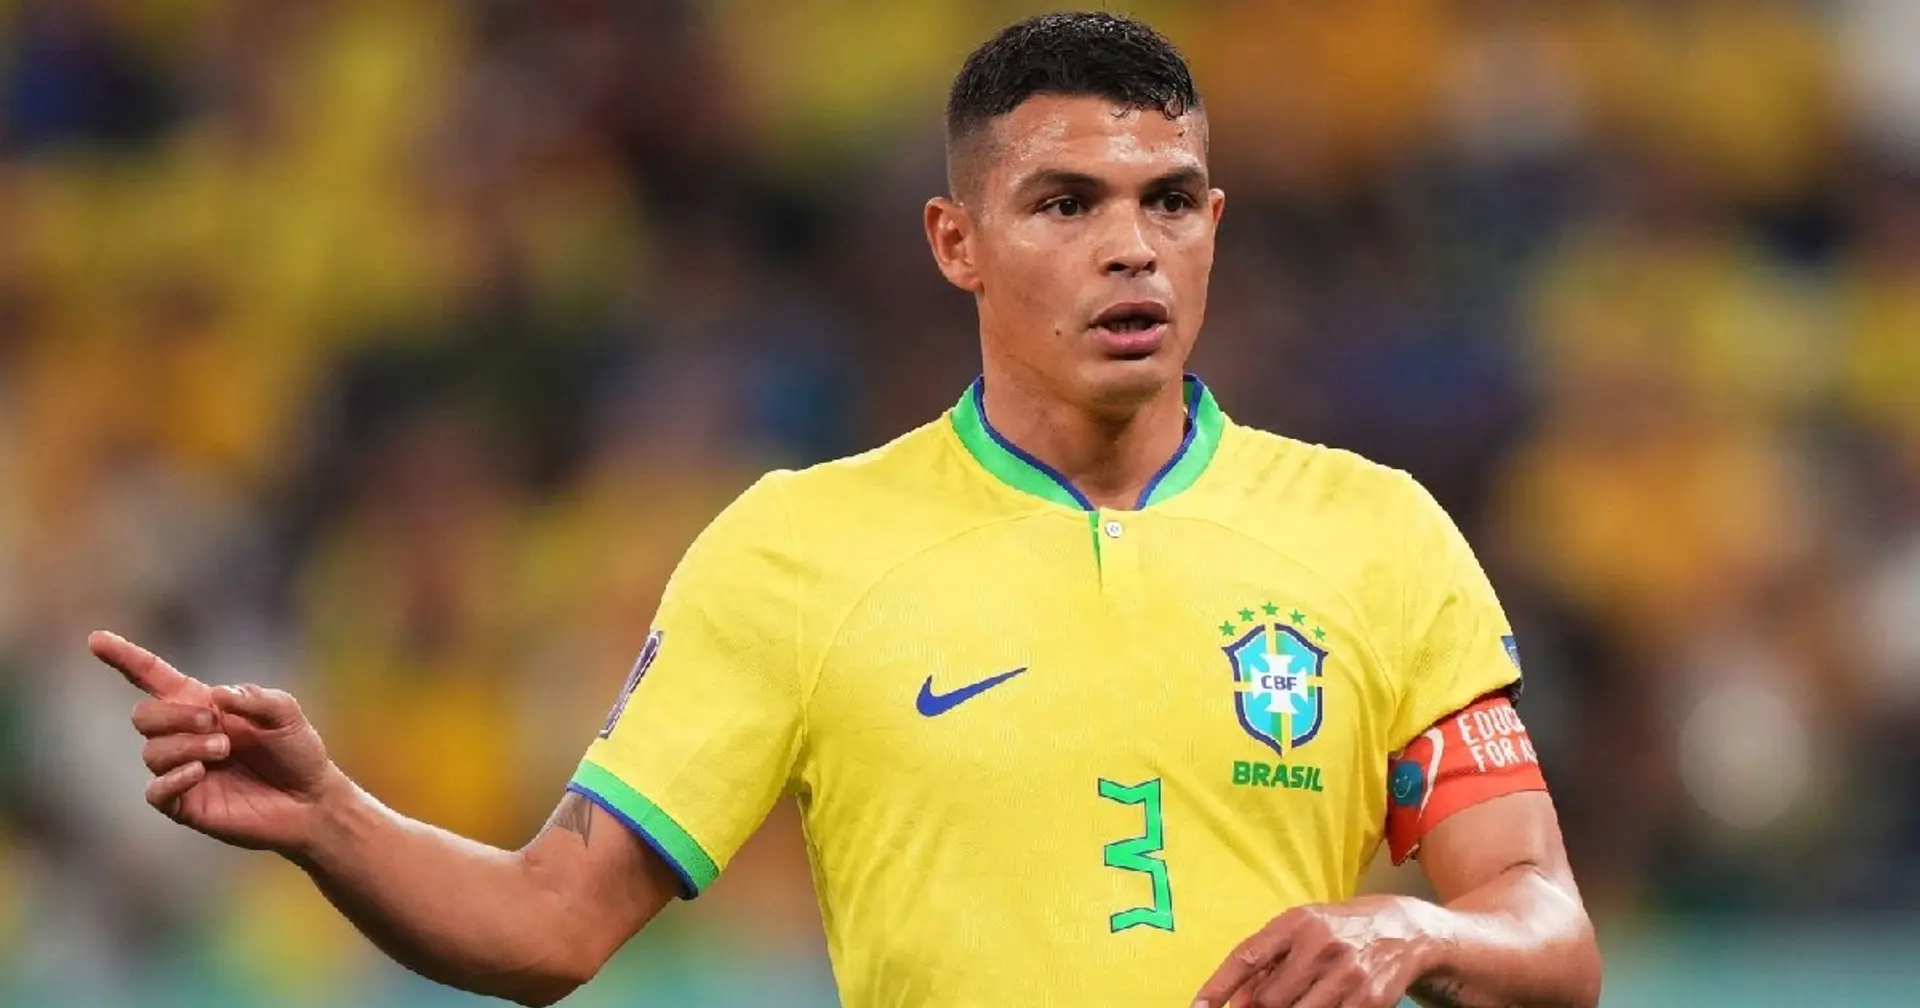 Thiago Silva and Brazil into the quarter finals of World Cup with win over South Korea